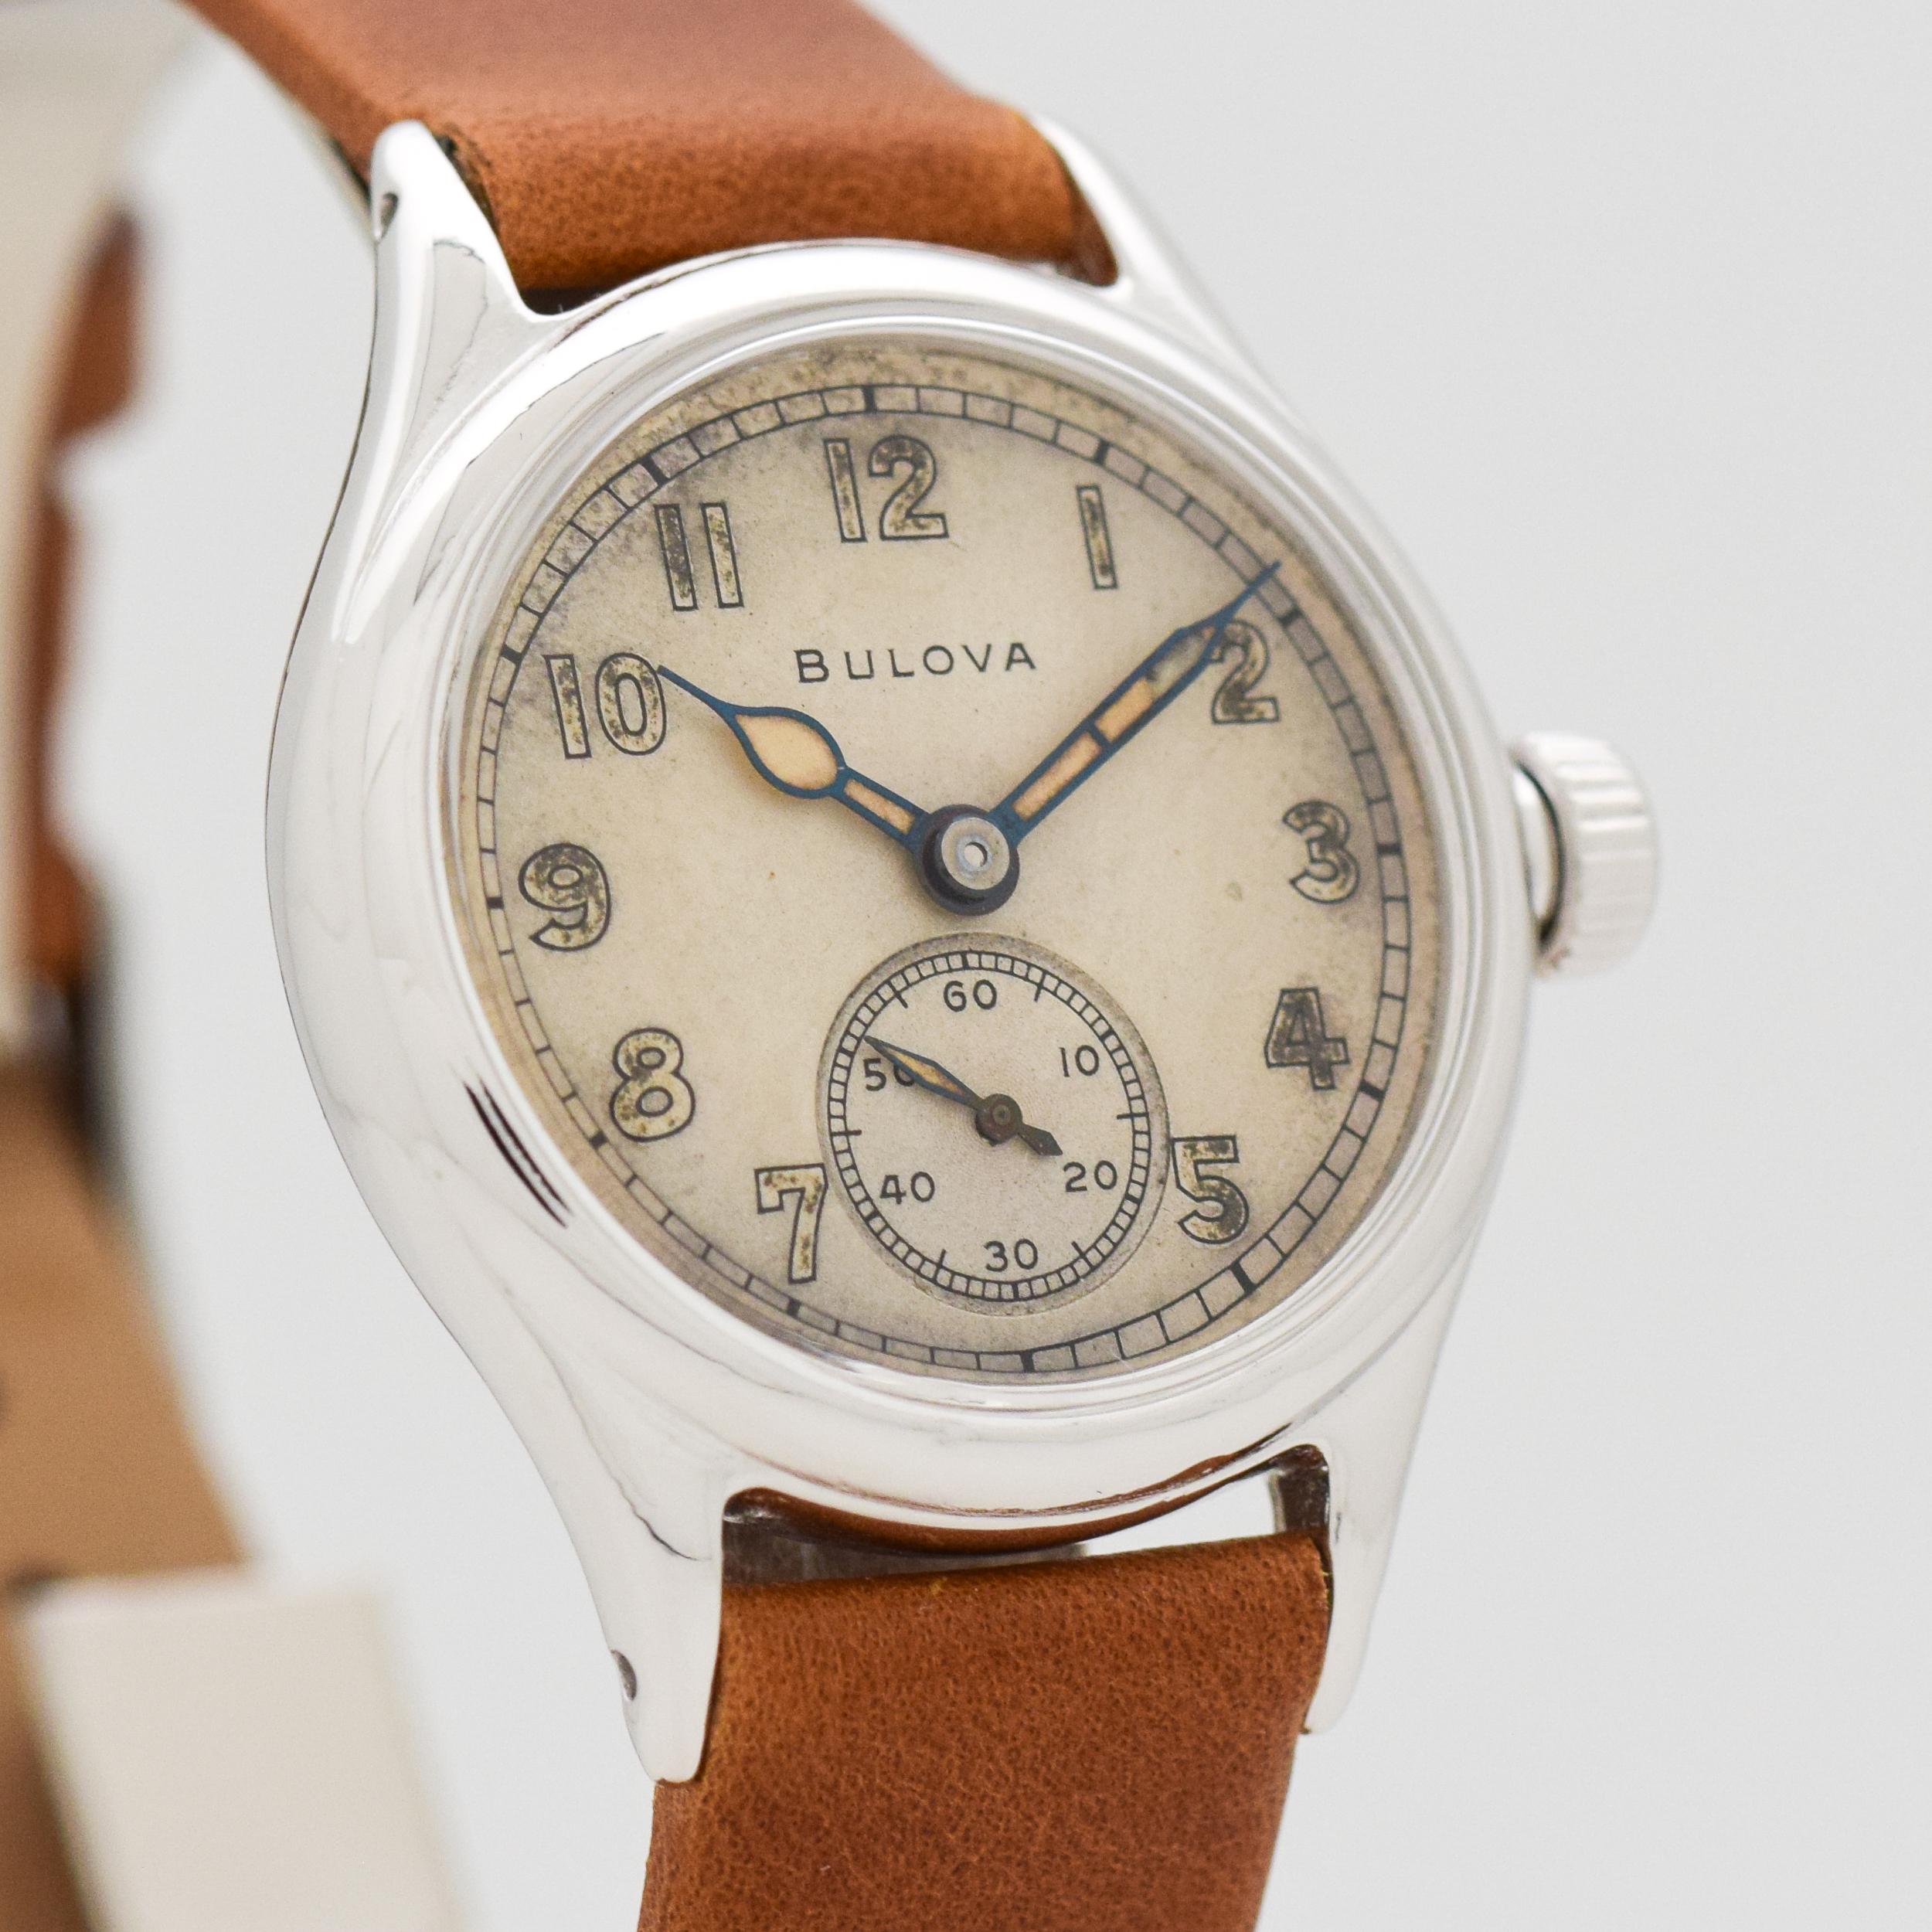 1944 Vintage Bulova WWII Military Chrome watch with Original Silver Dial with Light Brown Luminous Arabic Numbers. 32mm x 39mm lug to lug (1.26 in. x 1.54 in.) - 15 jewel, manual caliber movement. Equipped with a Genuine Leather Brown Watch Strap.